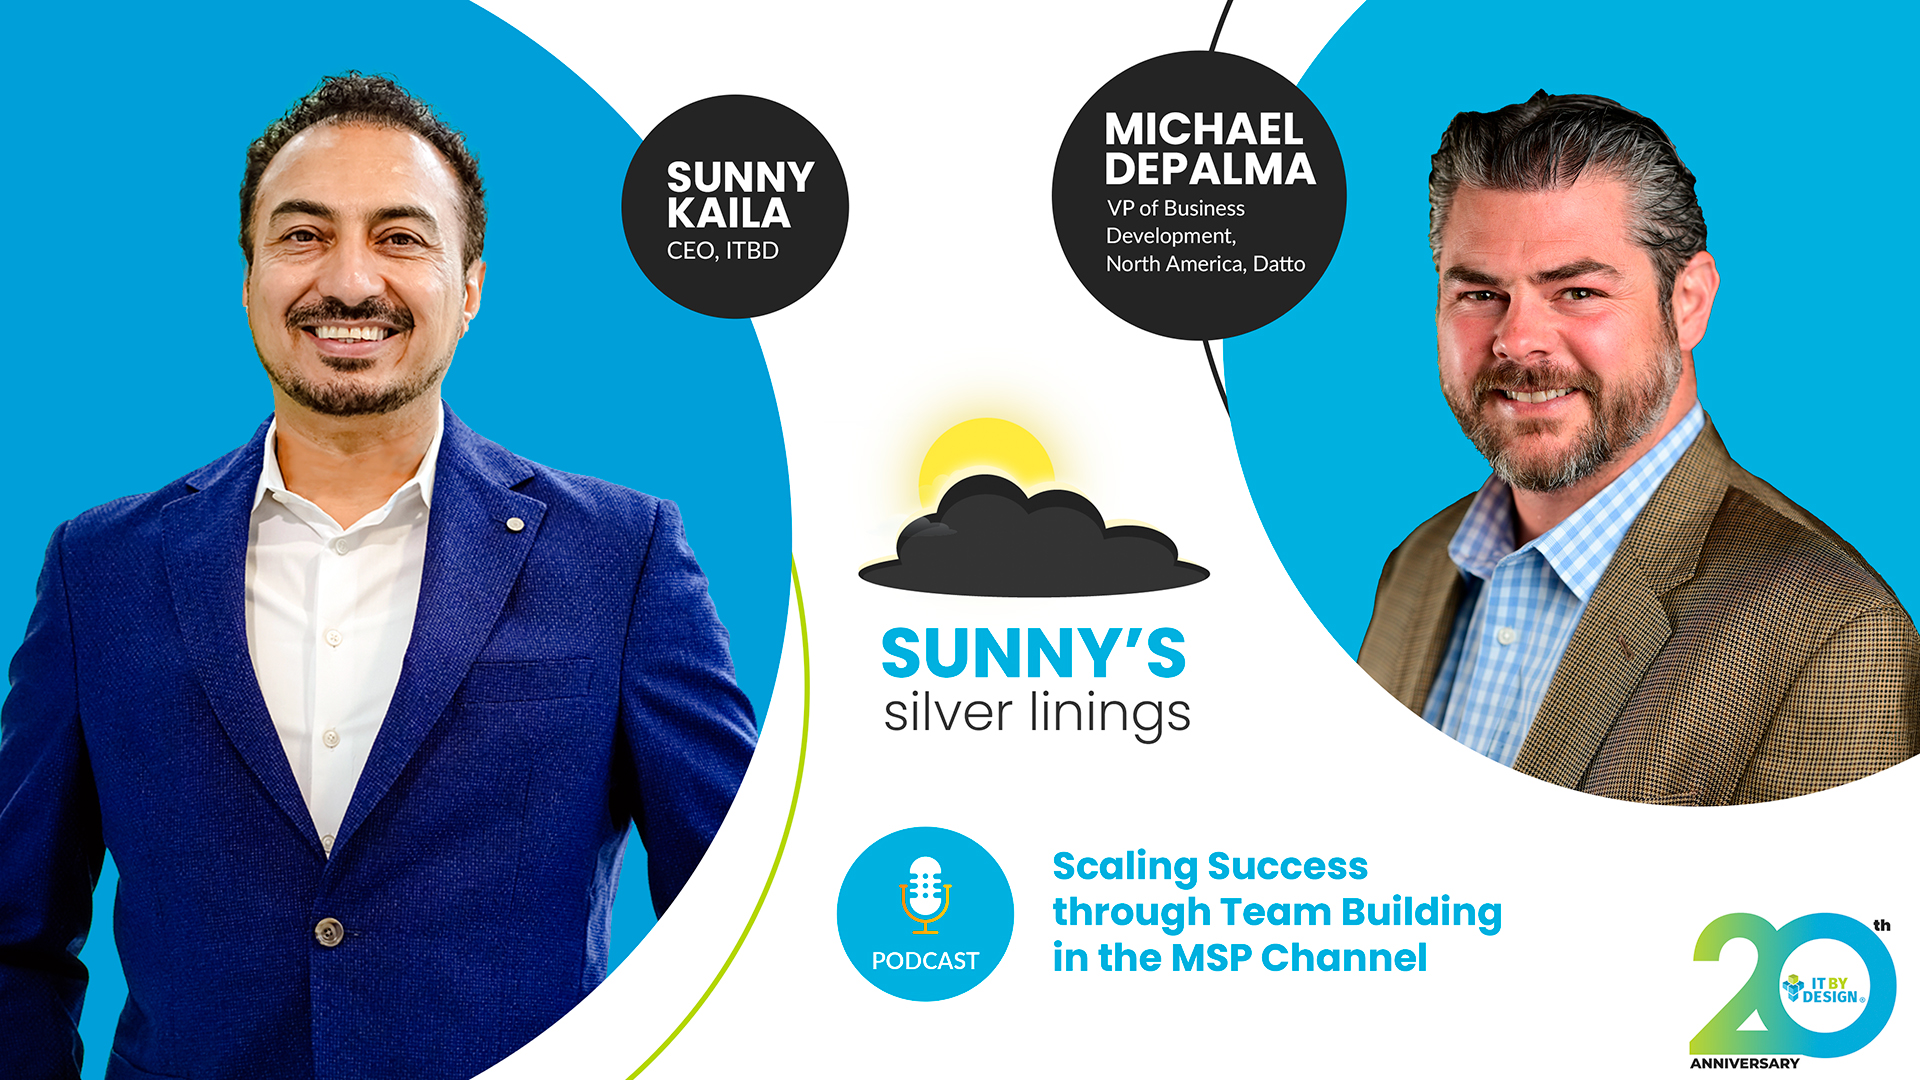 Scaling Success through Team Building in the MSP Channel with Michael DePalma